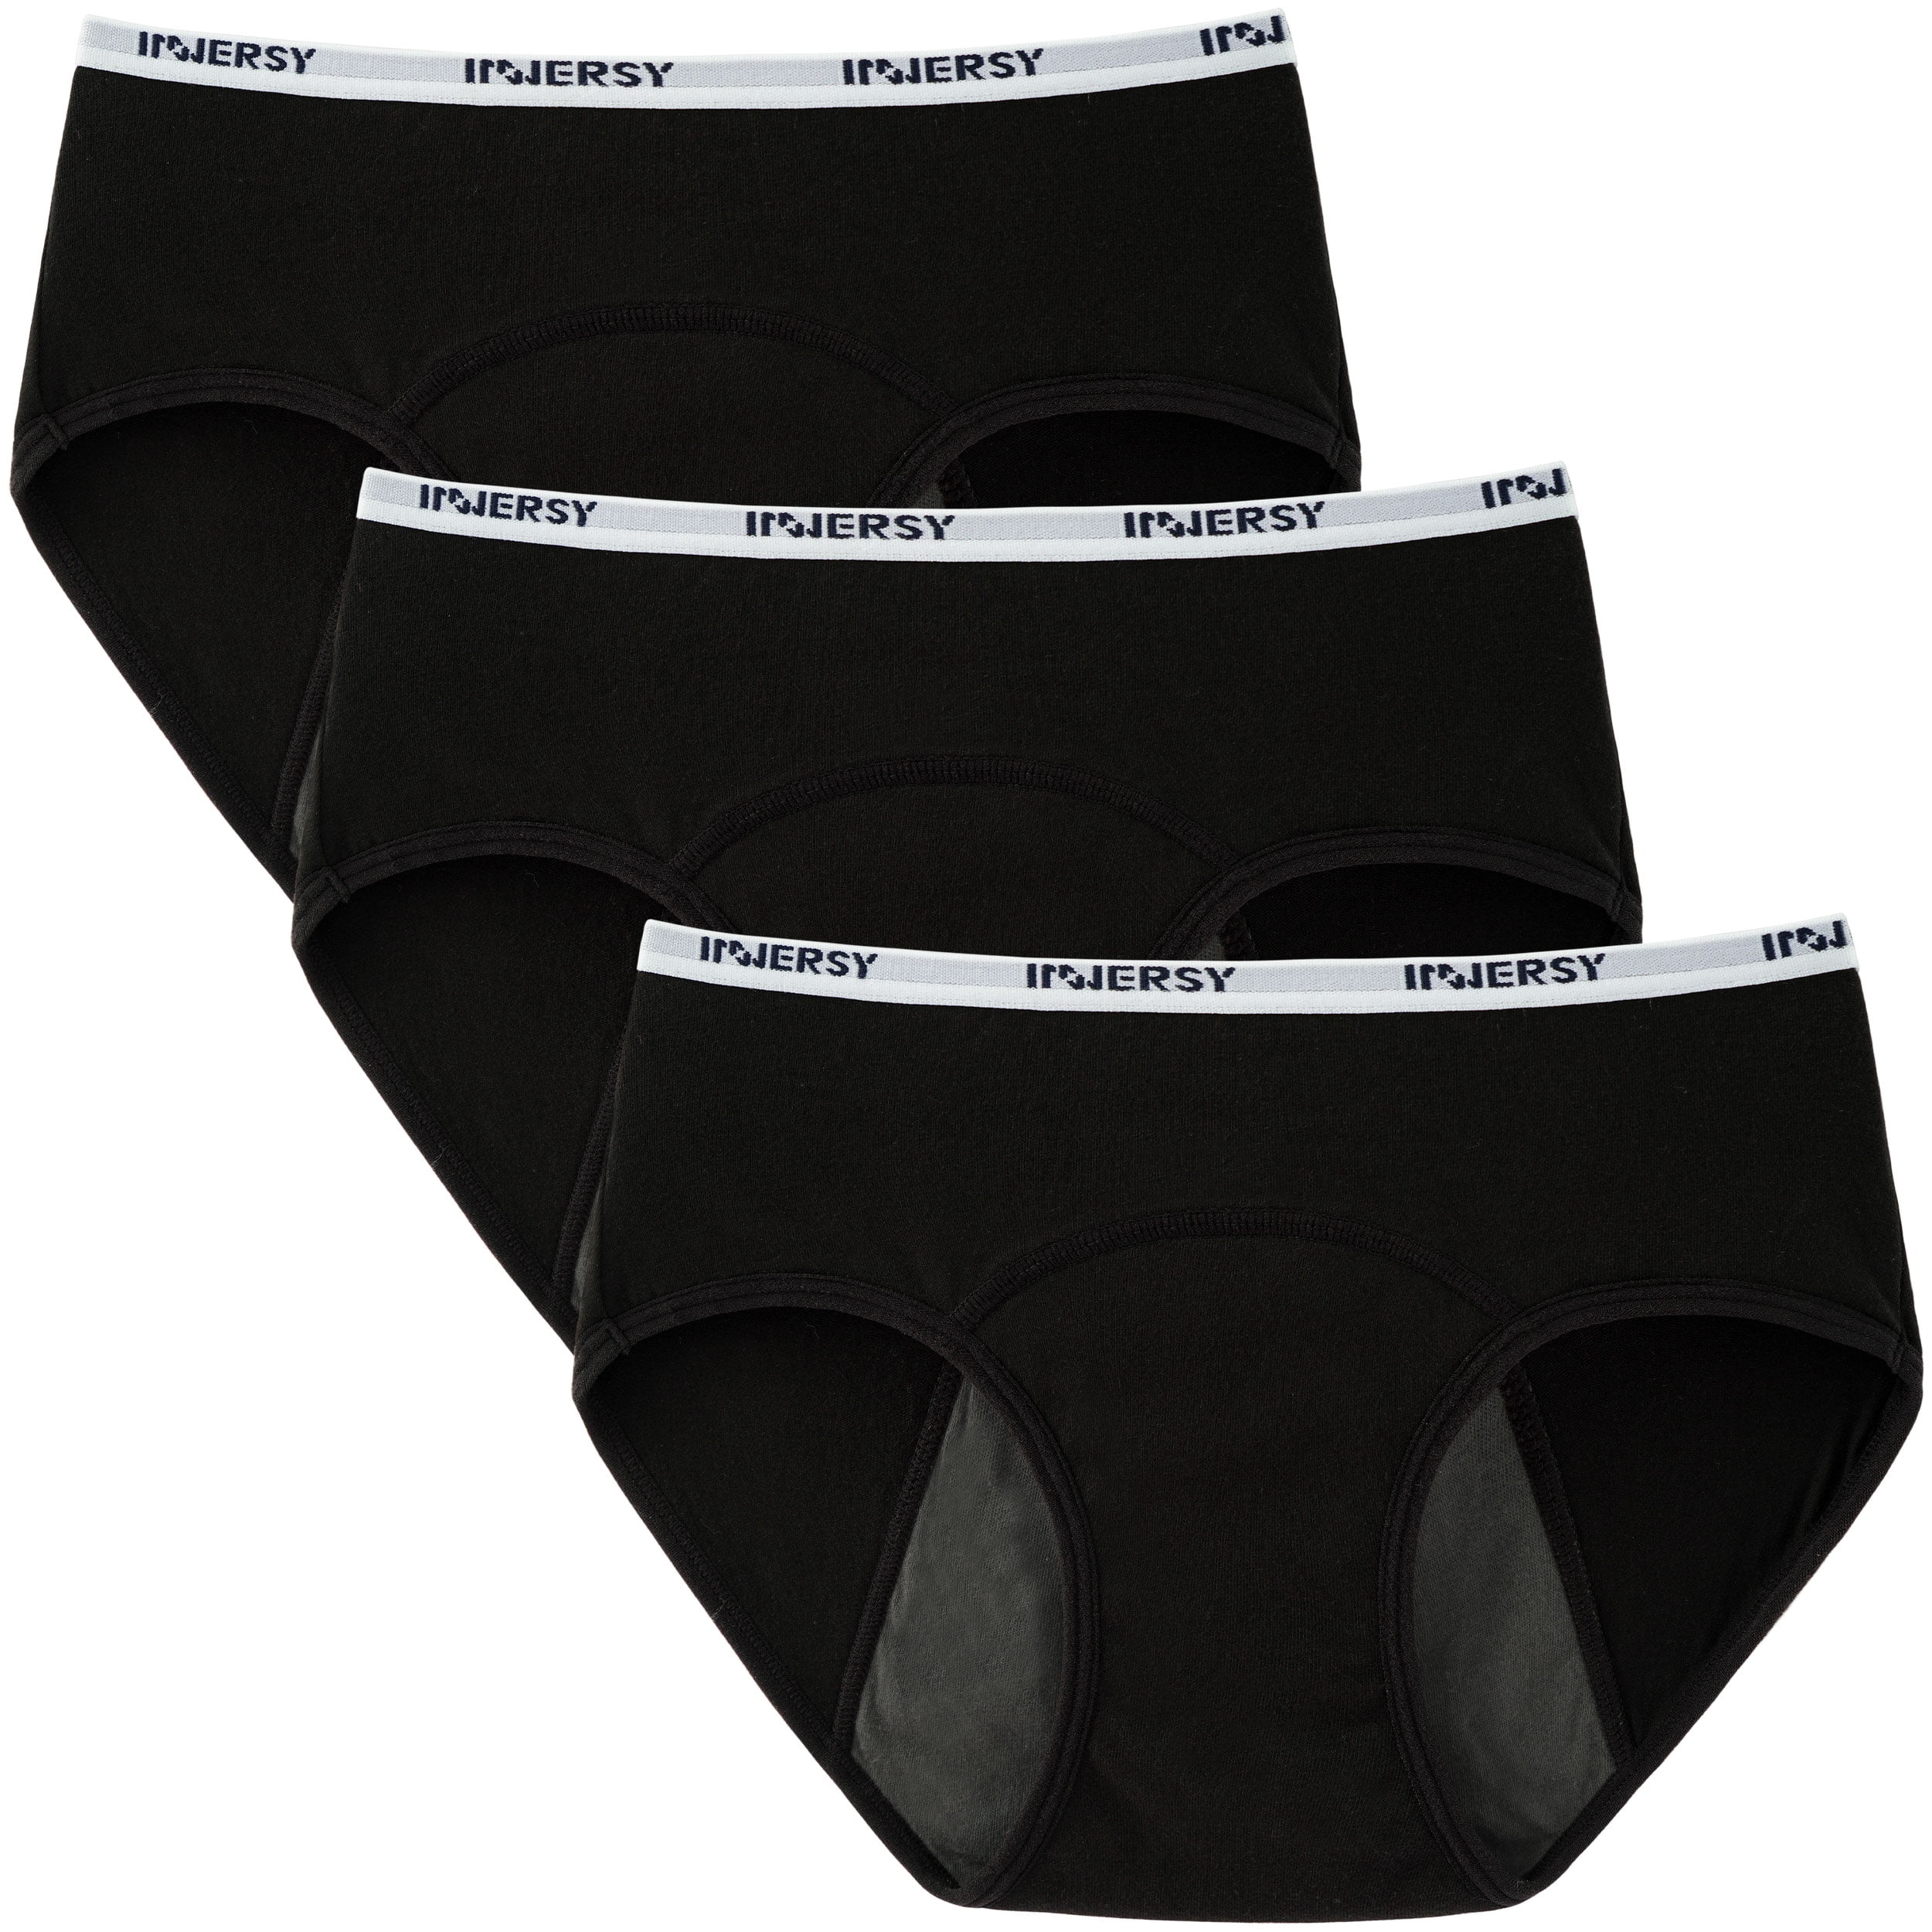 INNERSY Period Underwear for Teen Girls Cotton Leakproof Menstrual Panties  3 Pack (XL(14-16 yrs), Black with White Piping)